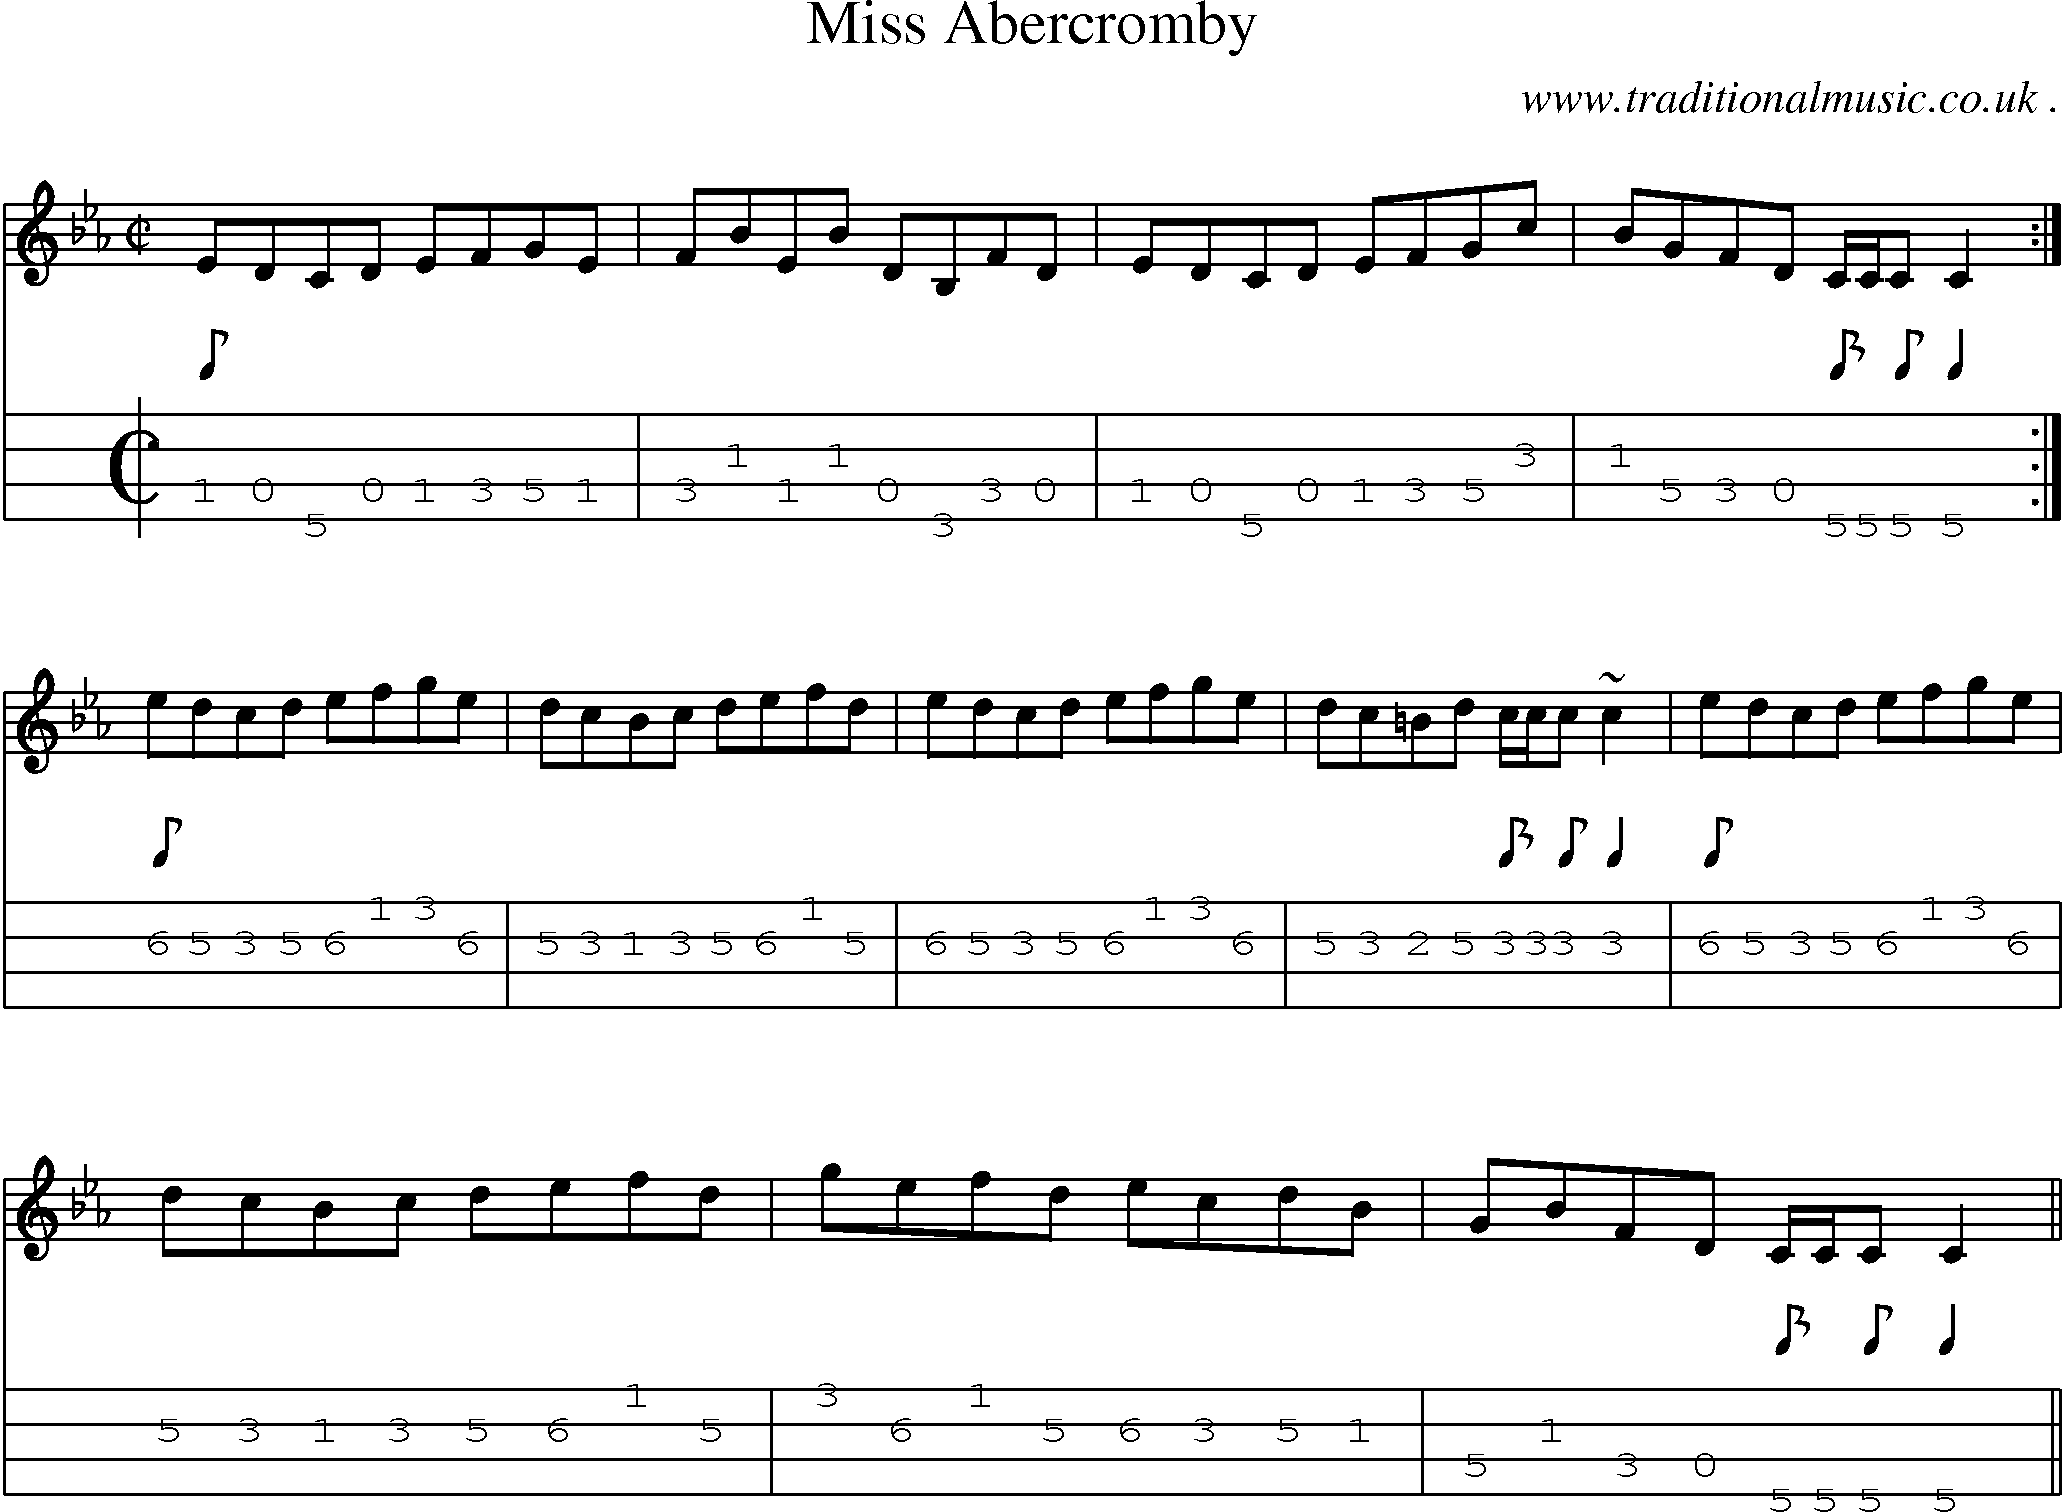 Sheet-music  score, Chords and Mandolin Tabs for Miss Abercromby